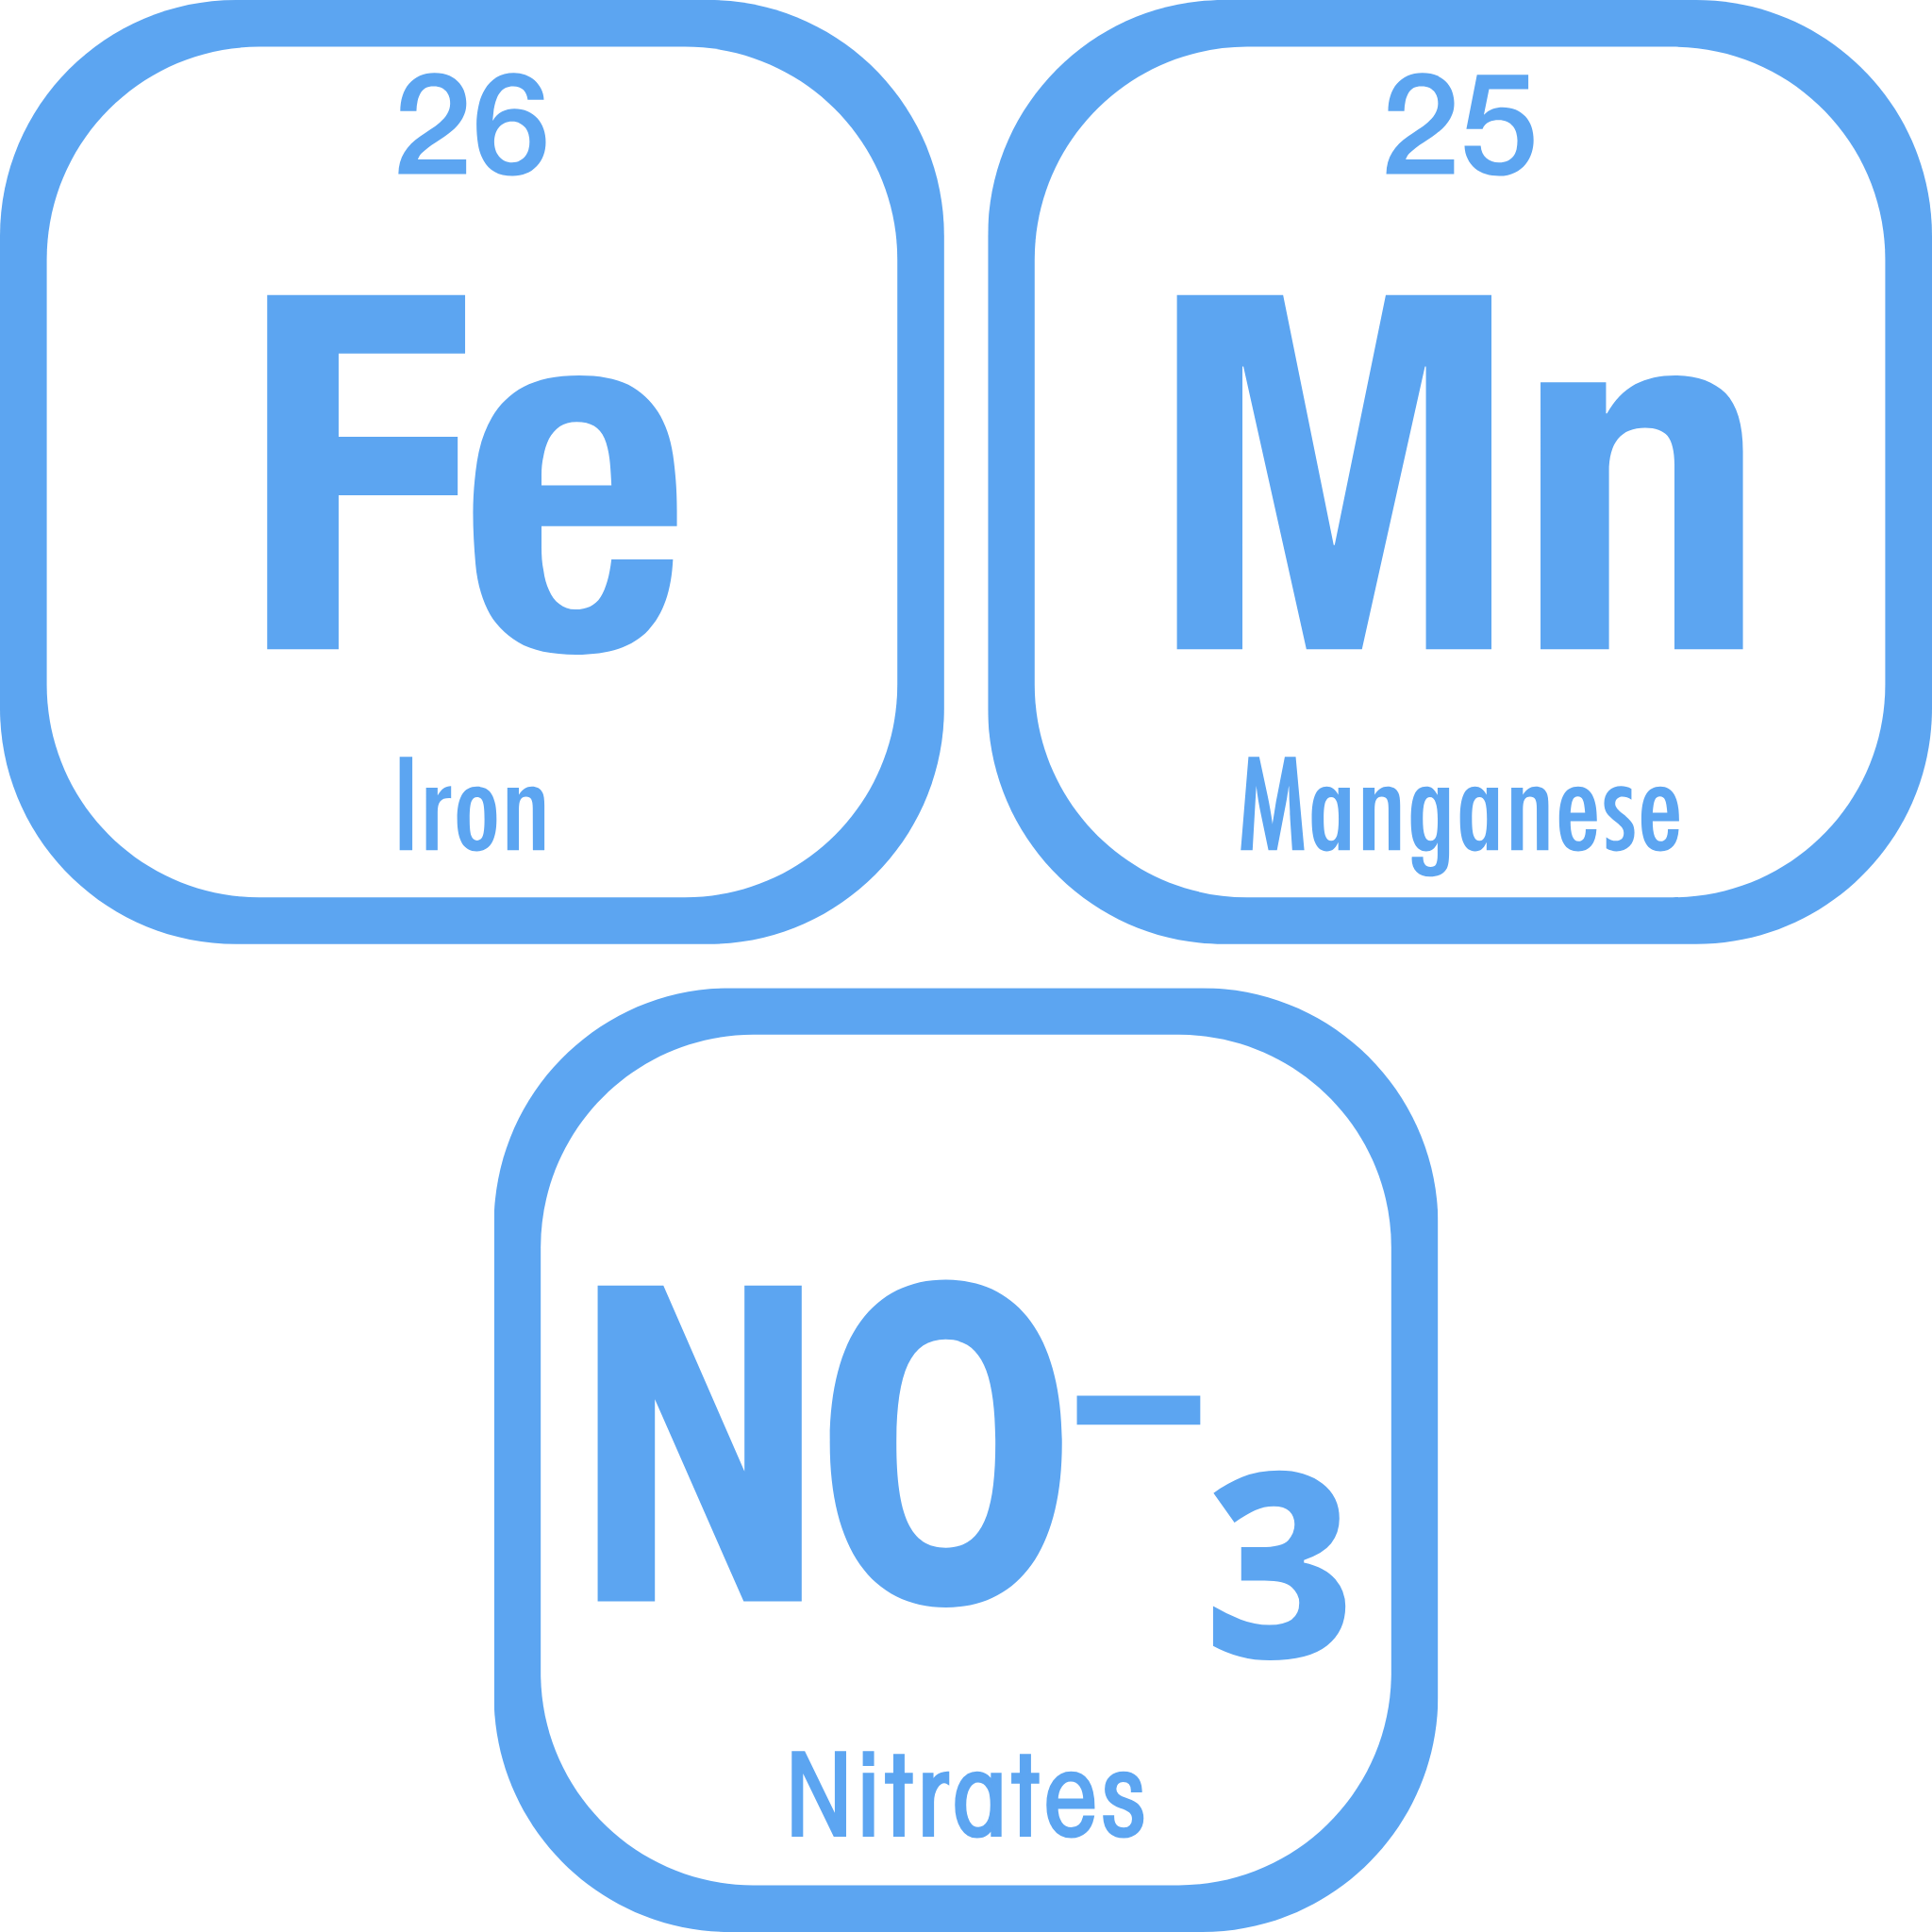 Icons representing iron, manganese, and nitrates with periodic table numbers for a water filtration system